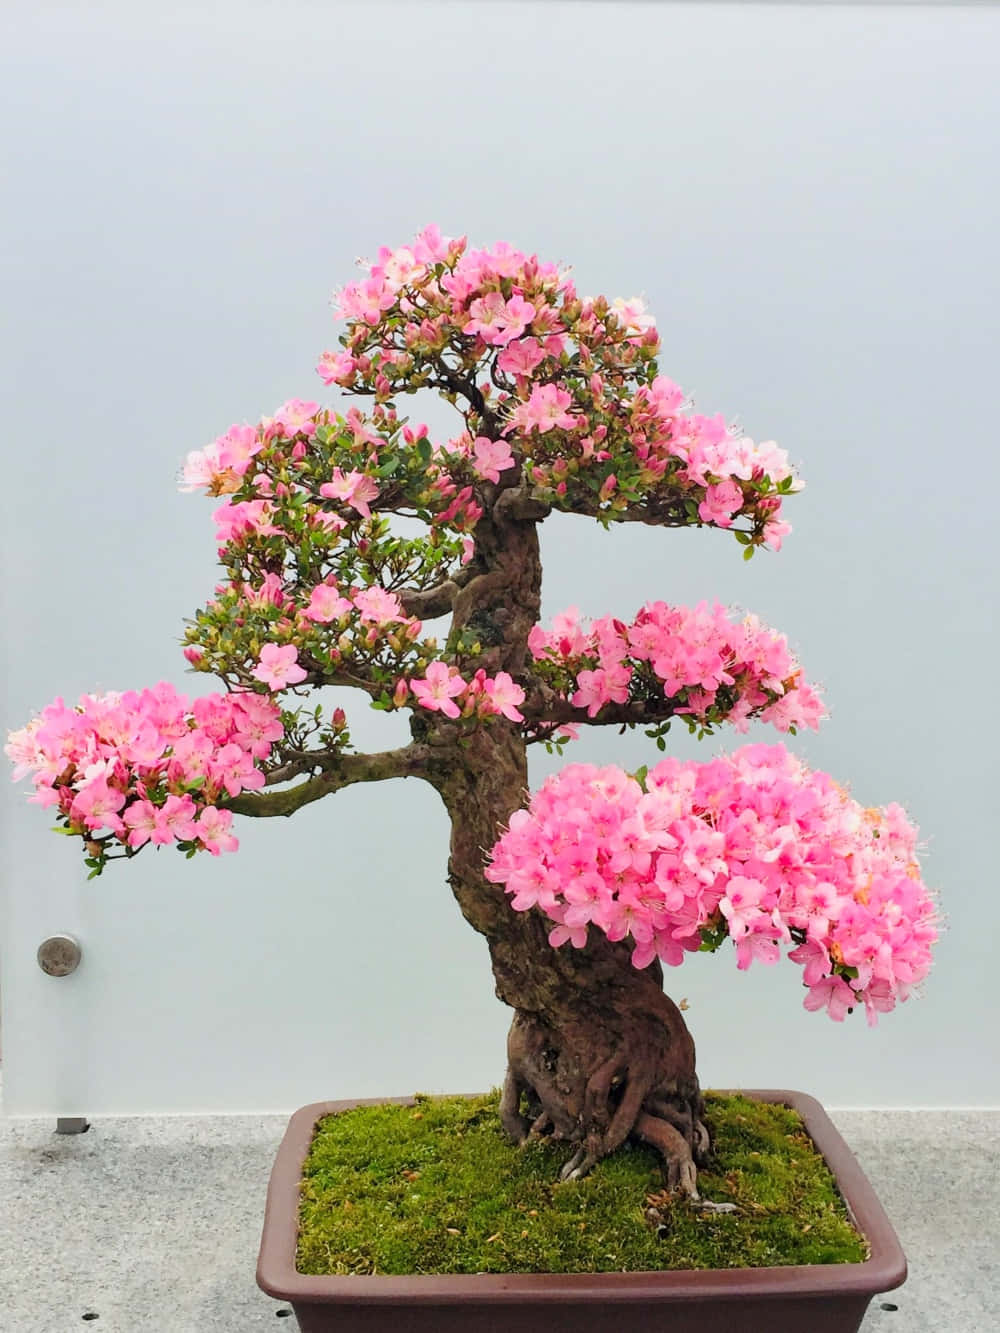 A Bonsai Tree With Pink Flowers In A Pot